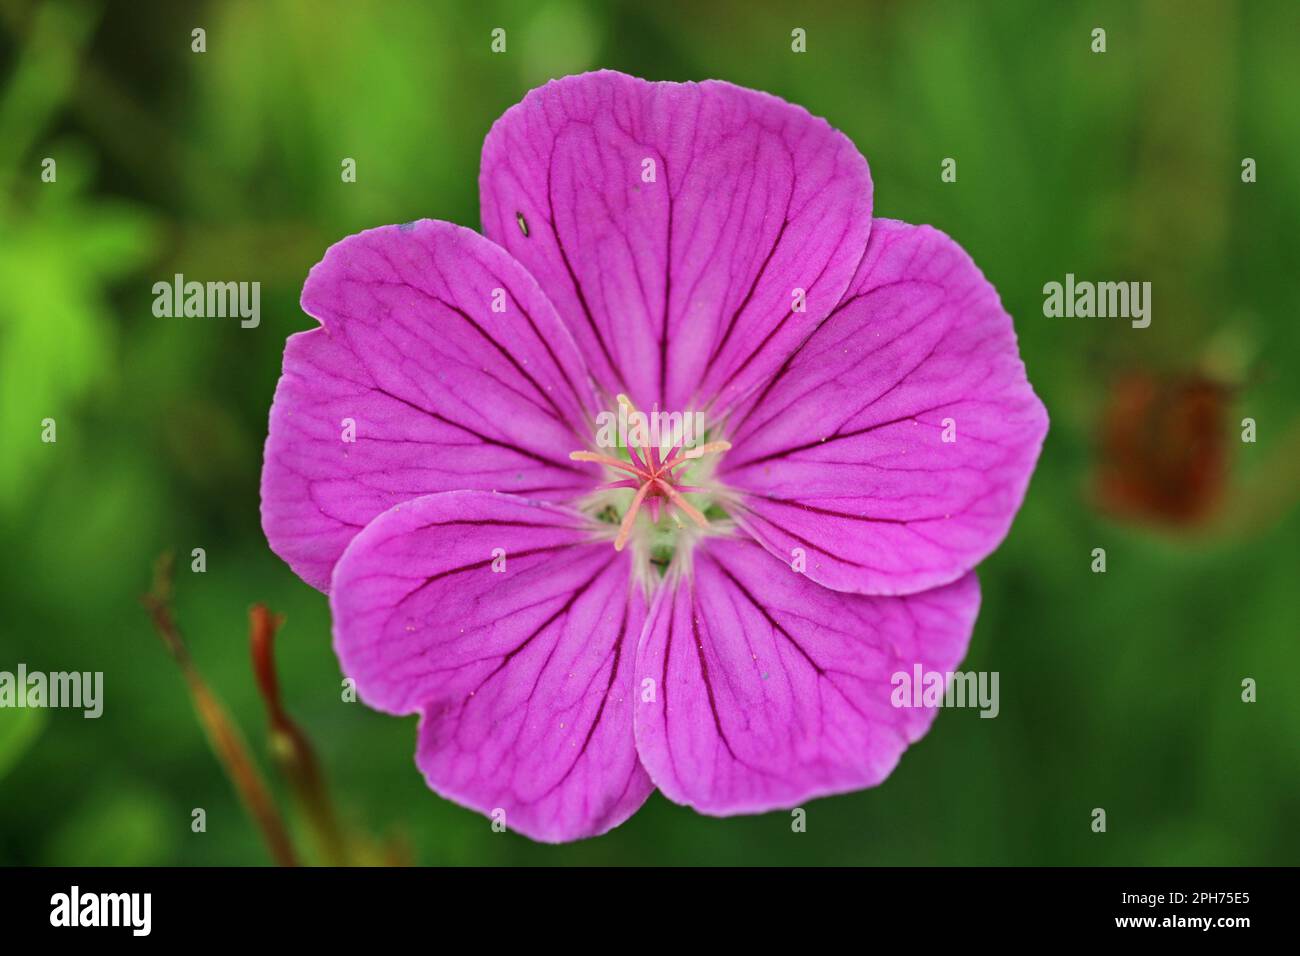 Pink cranesbill, Geranium unknown species and variety, flower with dark pink petal veins in close up with a background of blurred leaves. Stock Photo